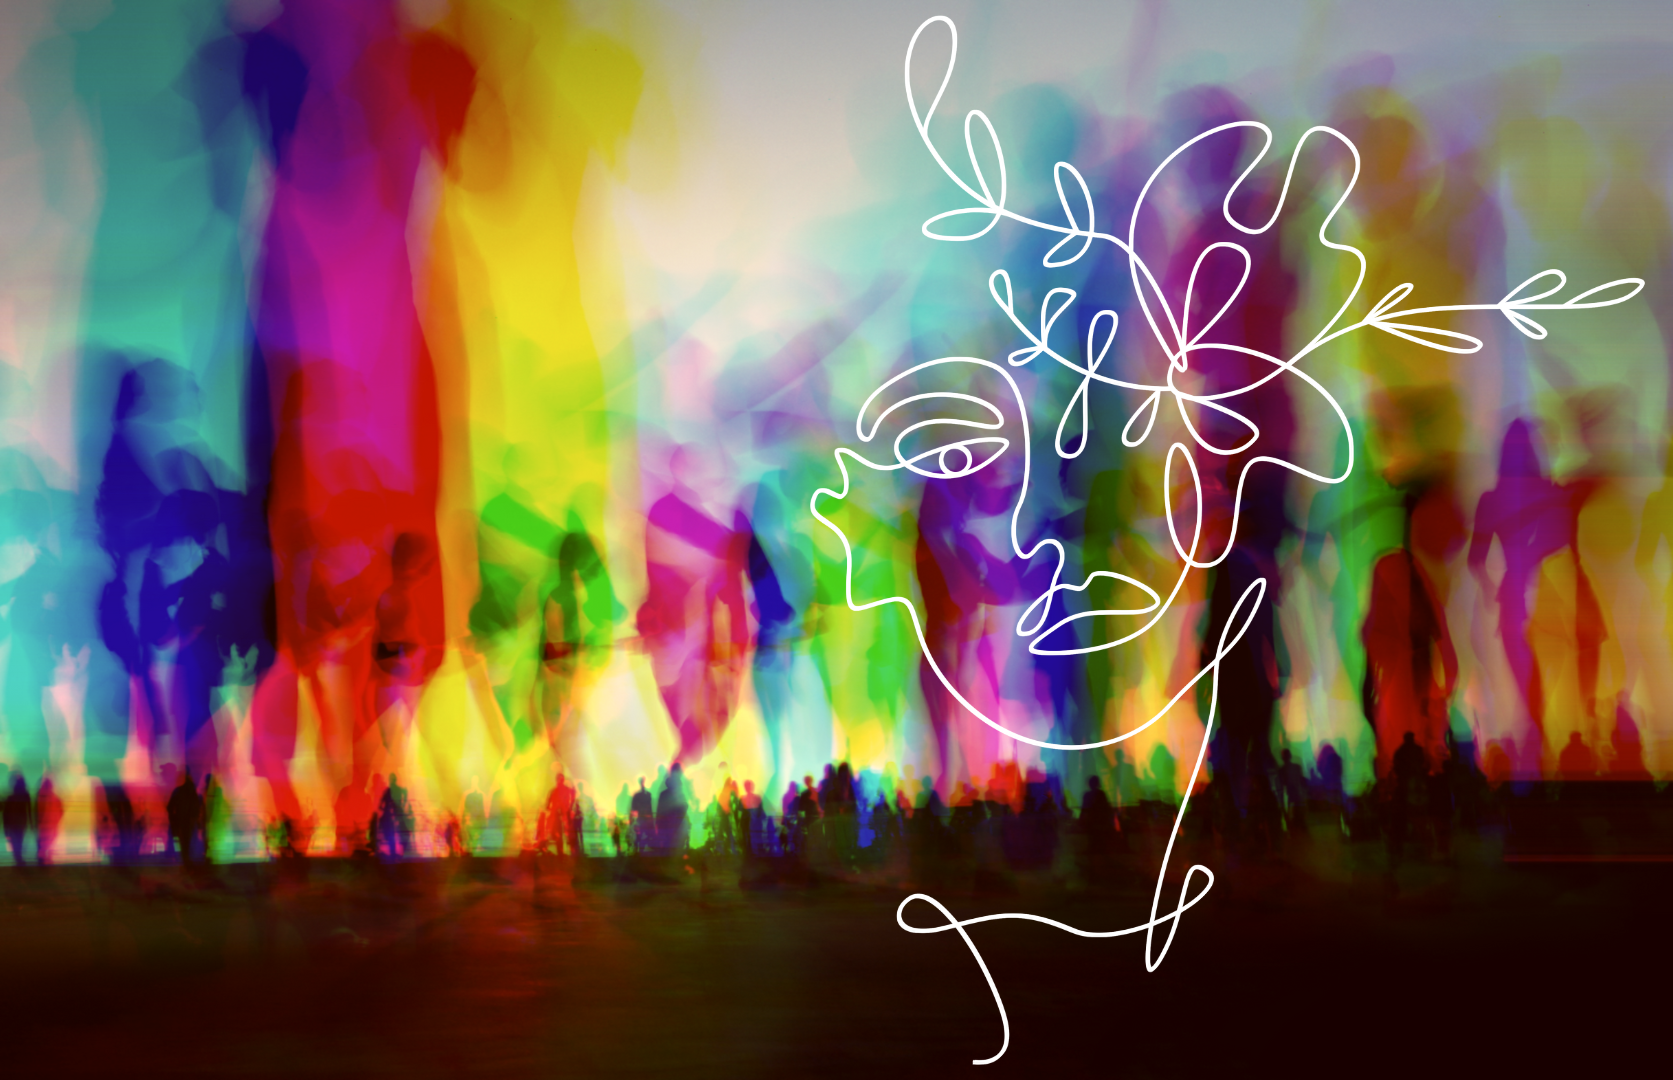 A colorful abstract painterly image of human silhouettes with a white line drawing of a face with natural elements